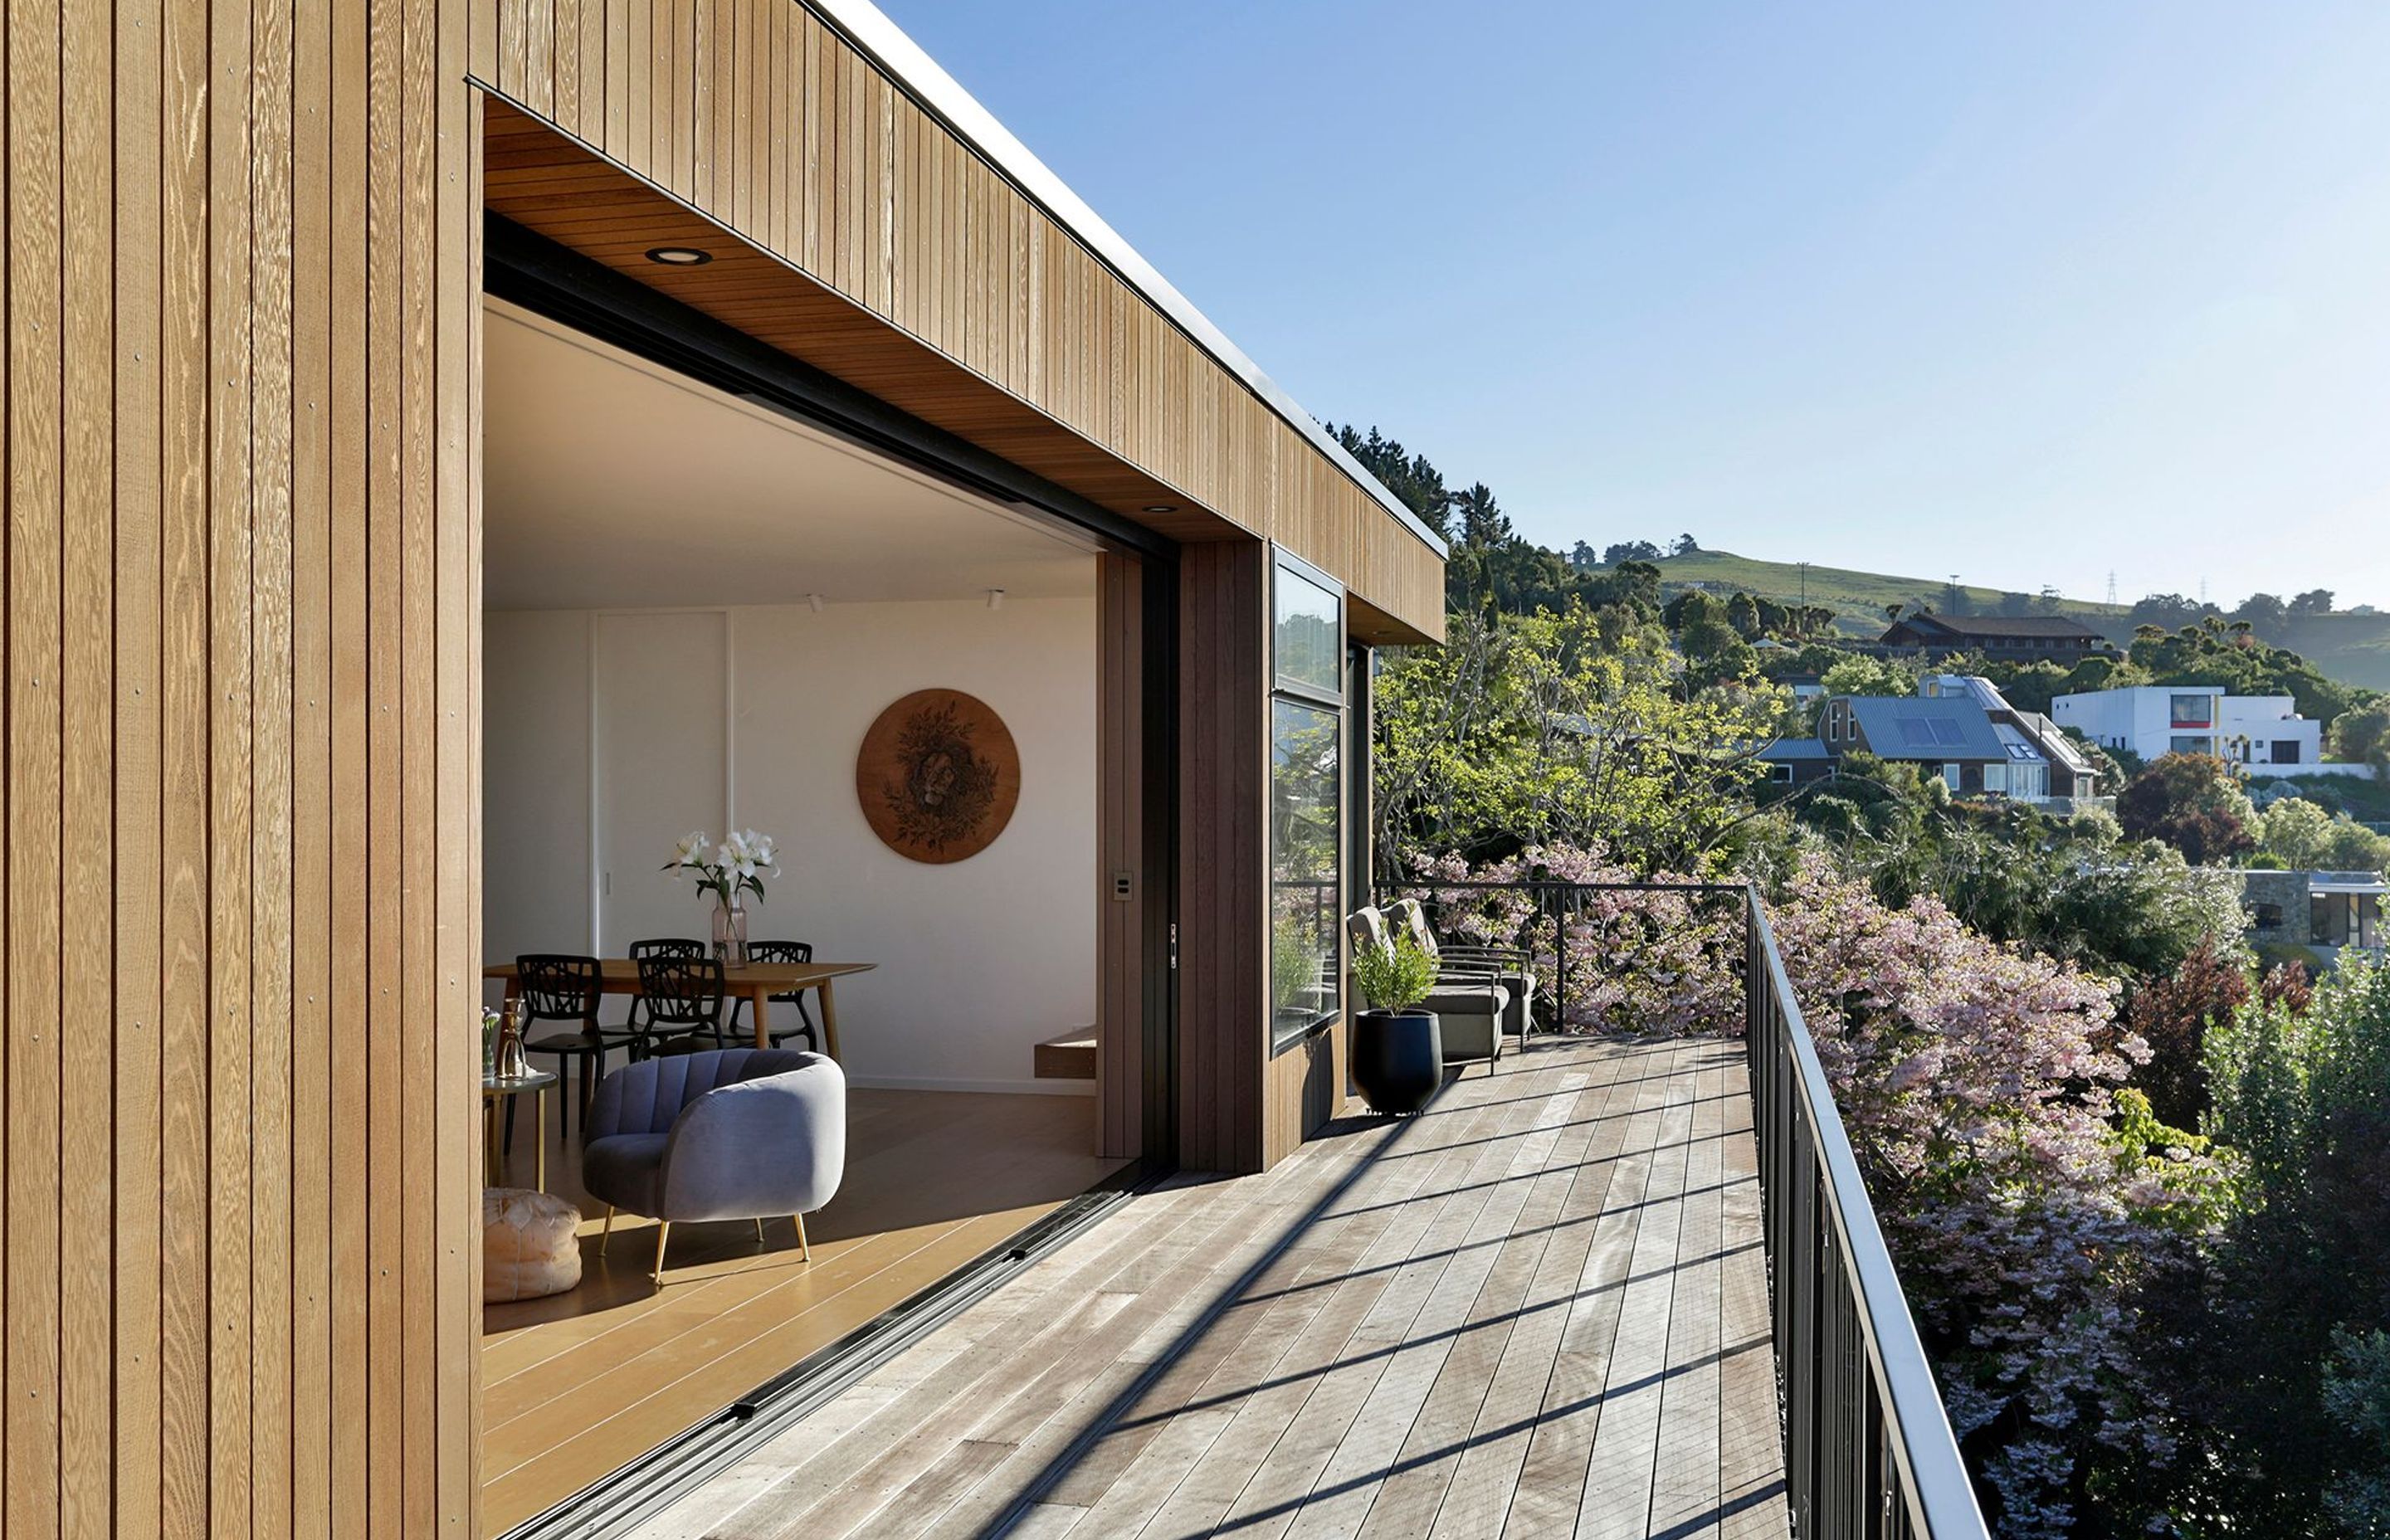 The front deck enjoys elevated views in three directions over the landscape.